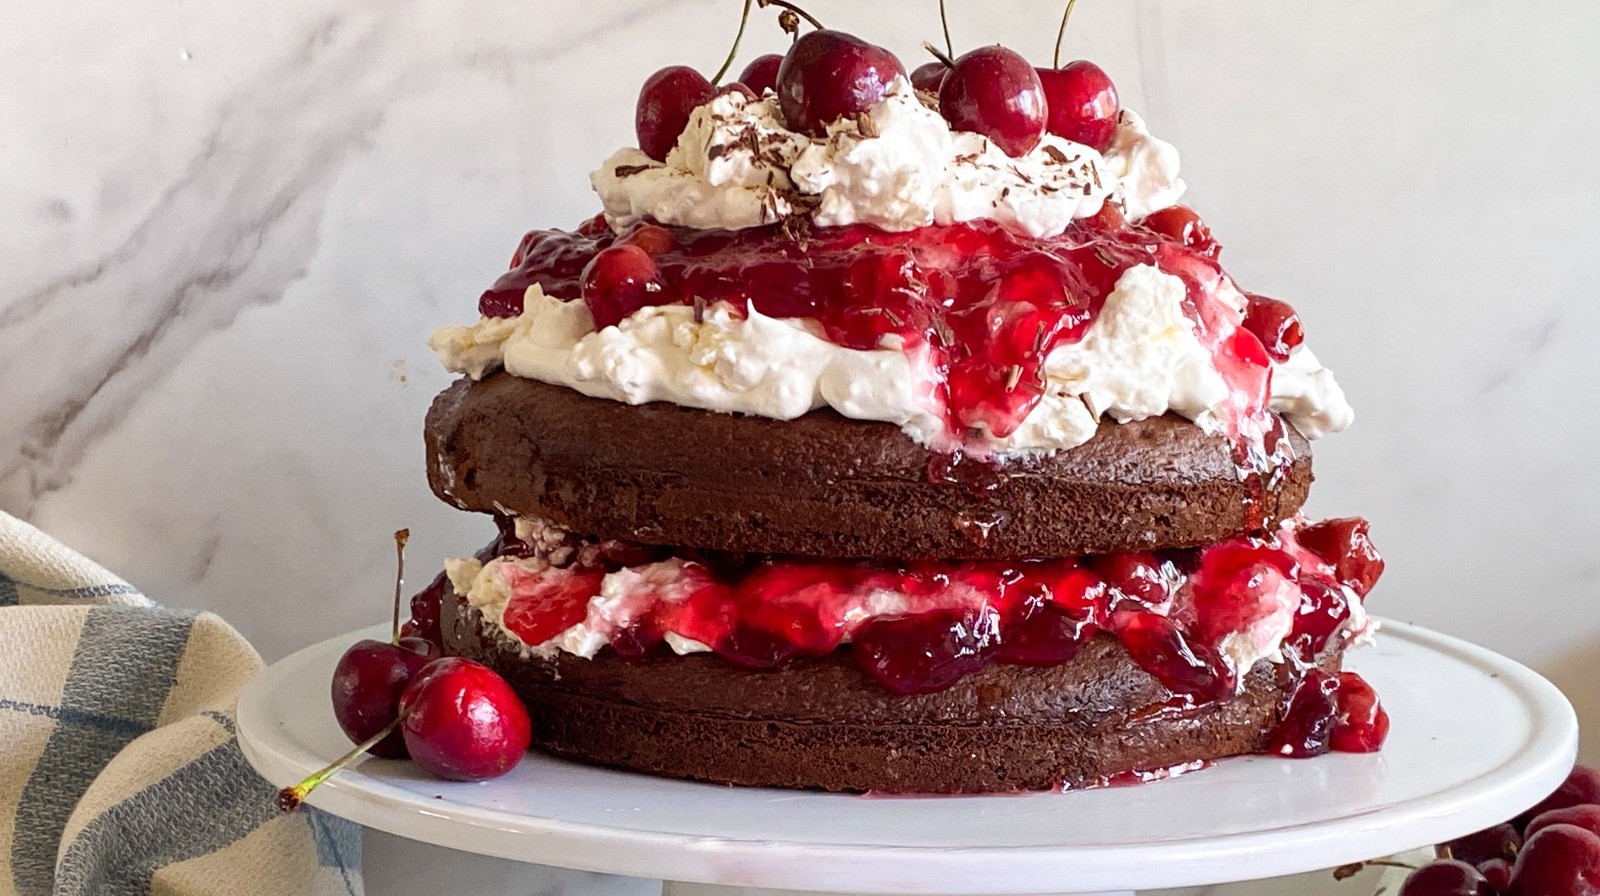 Best Black Forest Cake Recipe | With Cherries and whipped cream